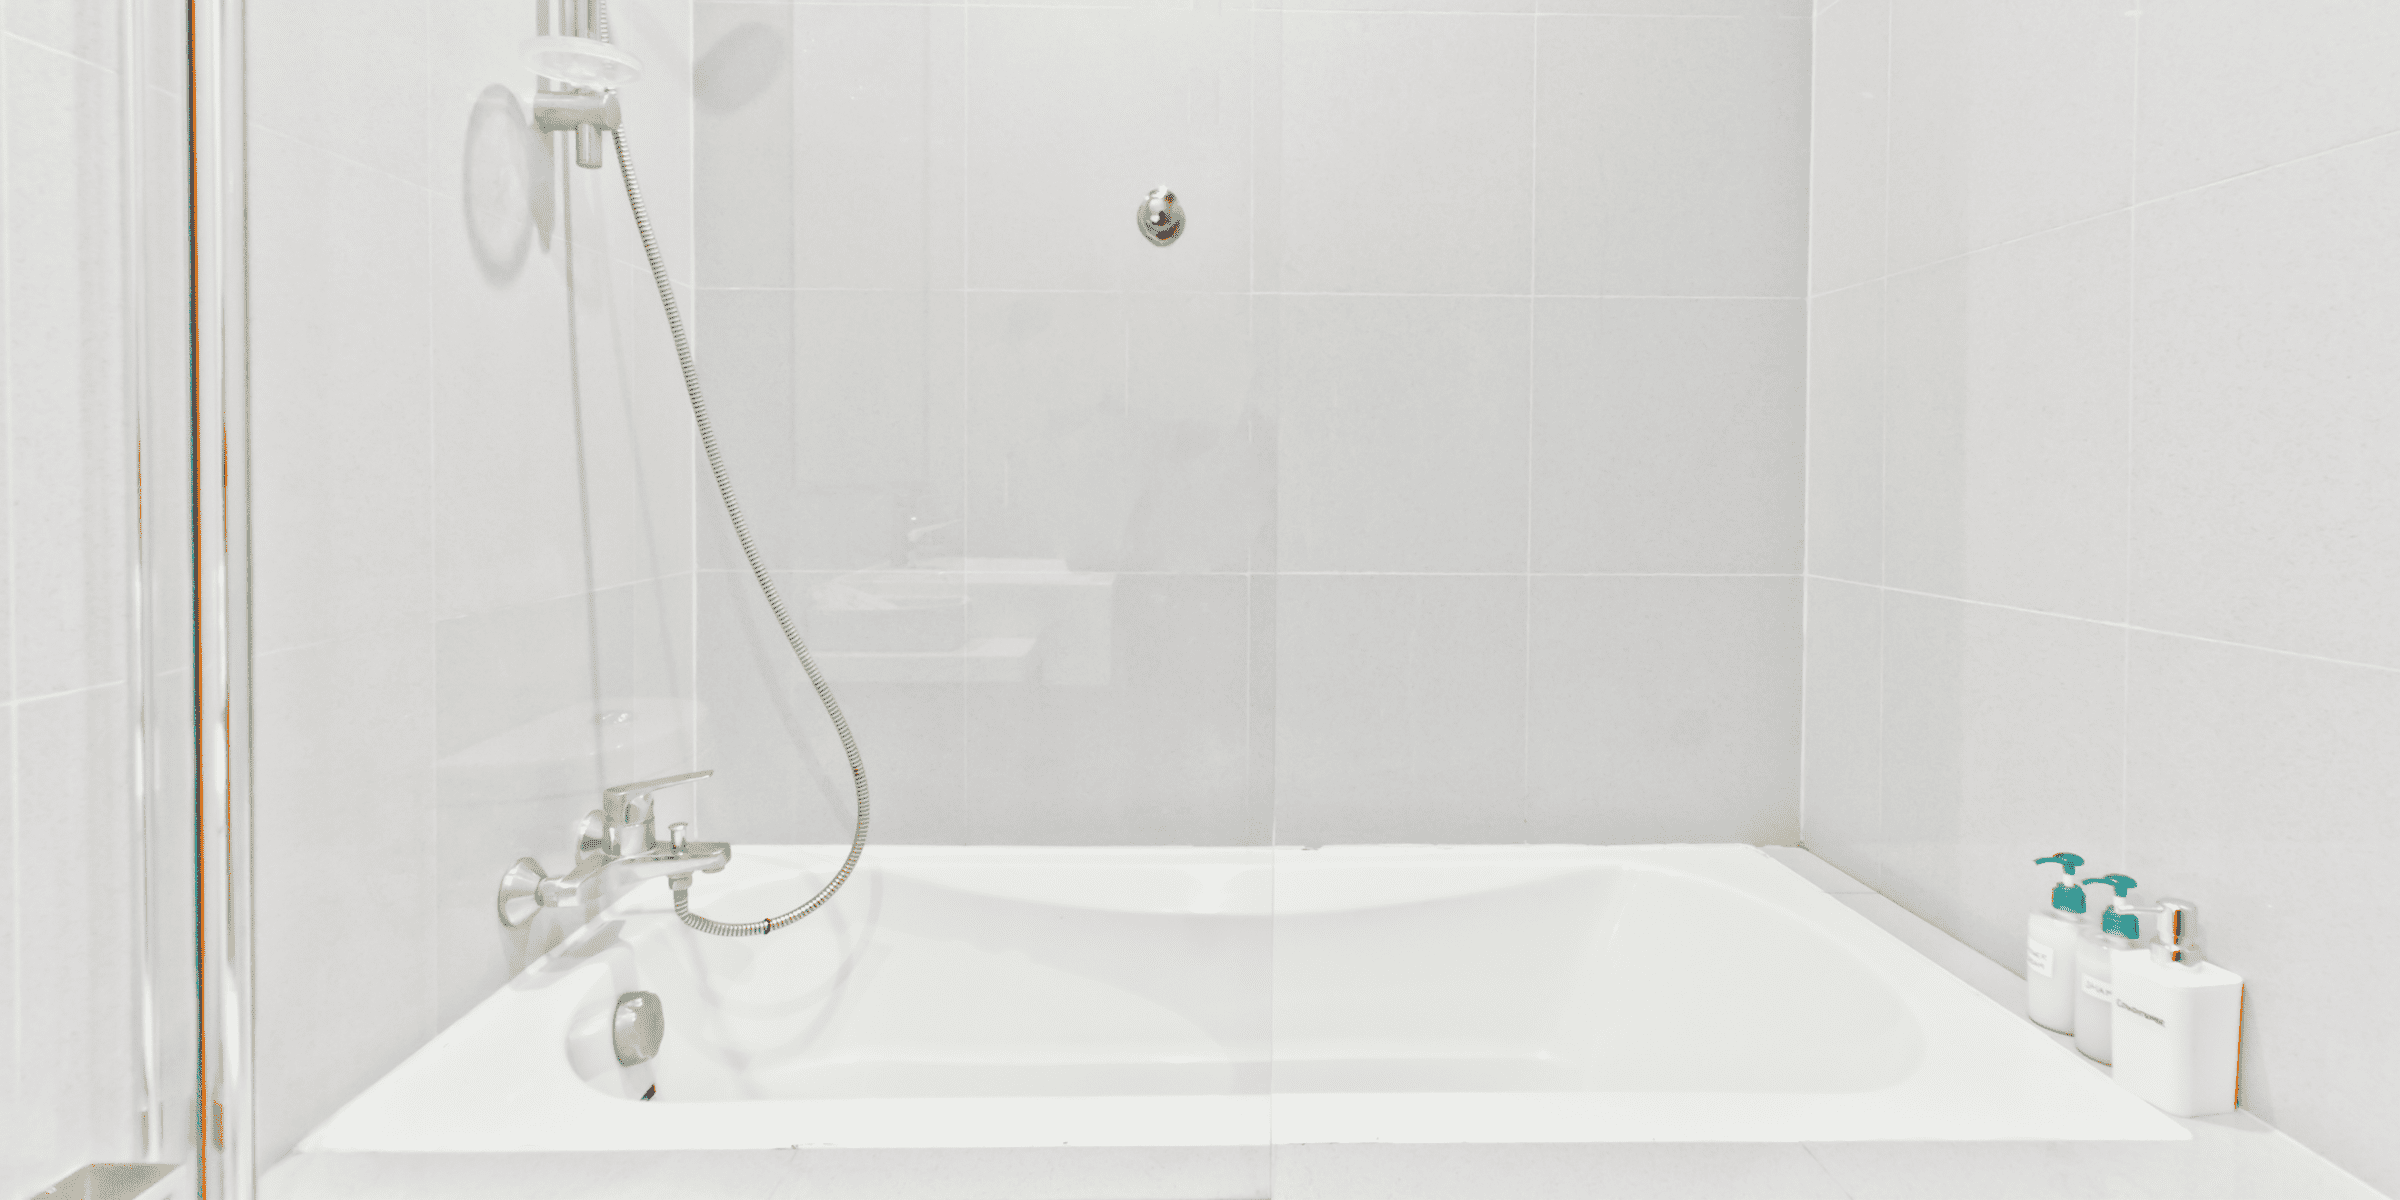 How to Remove Black Mold From Shower Caulk (6 Powerful Solutions)